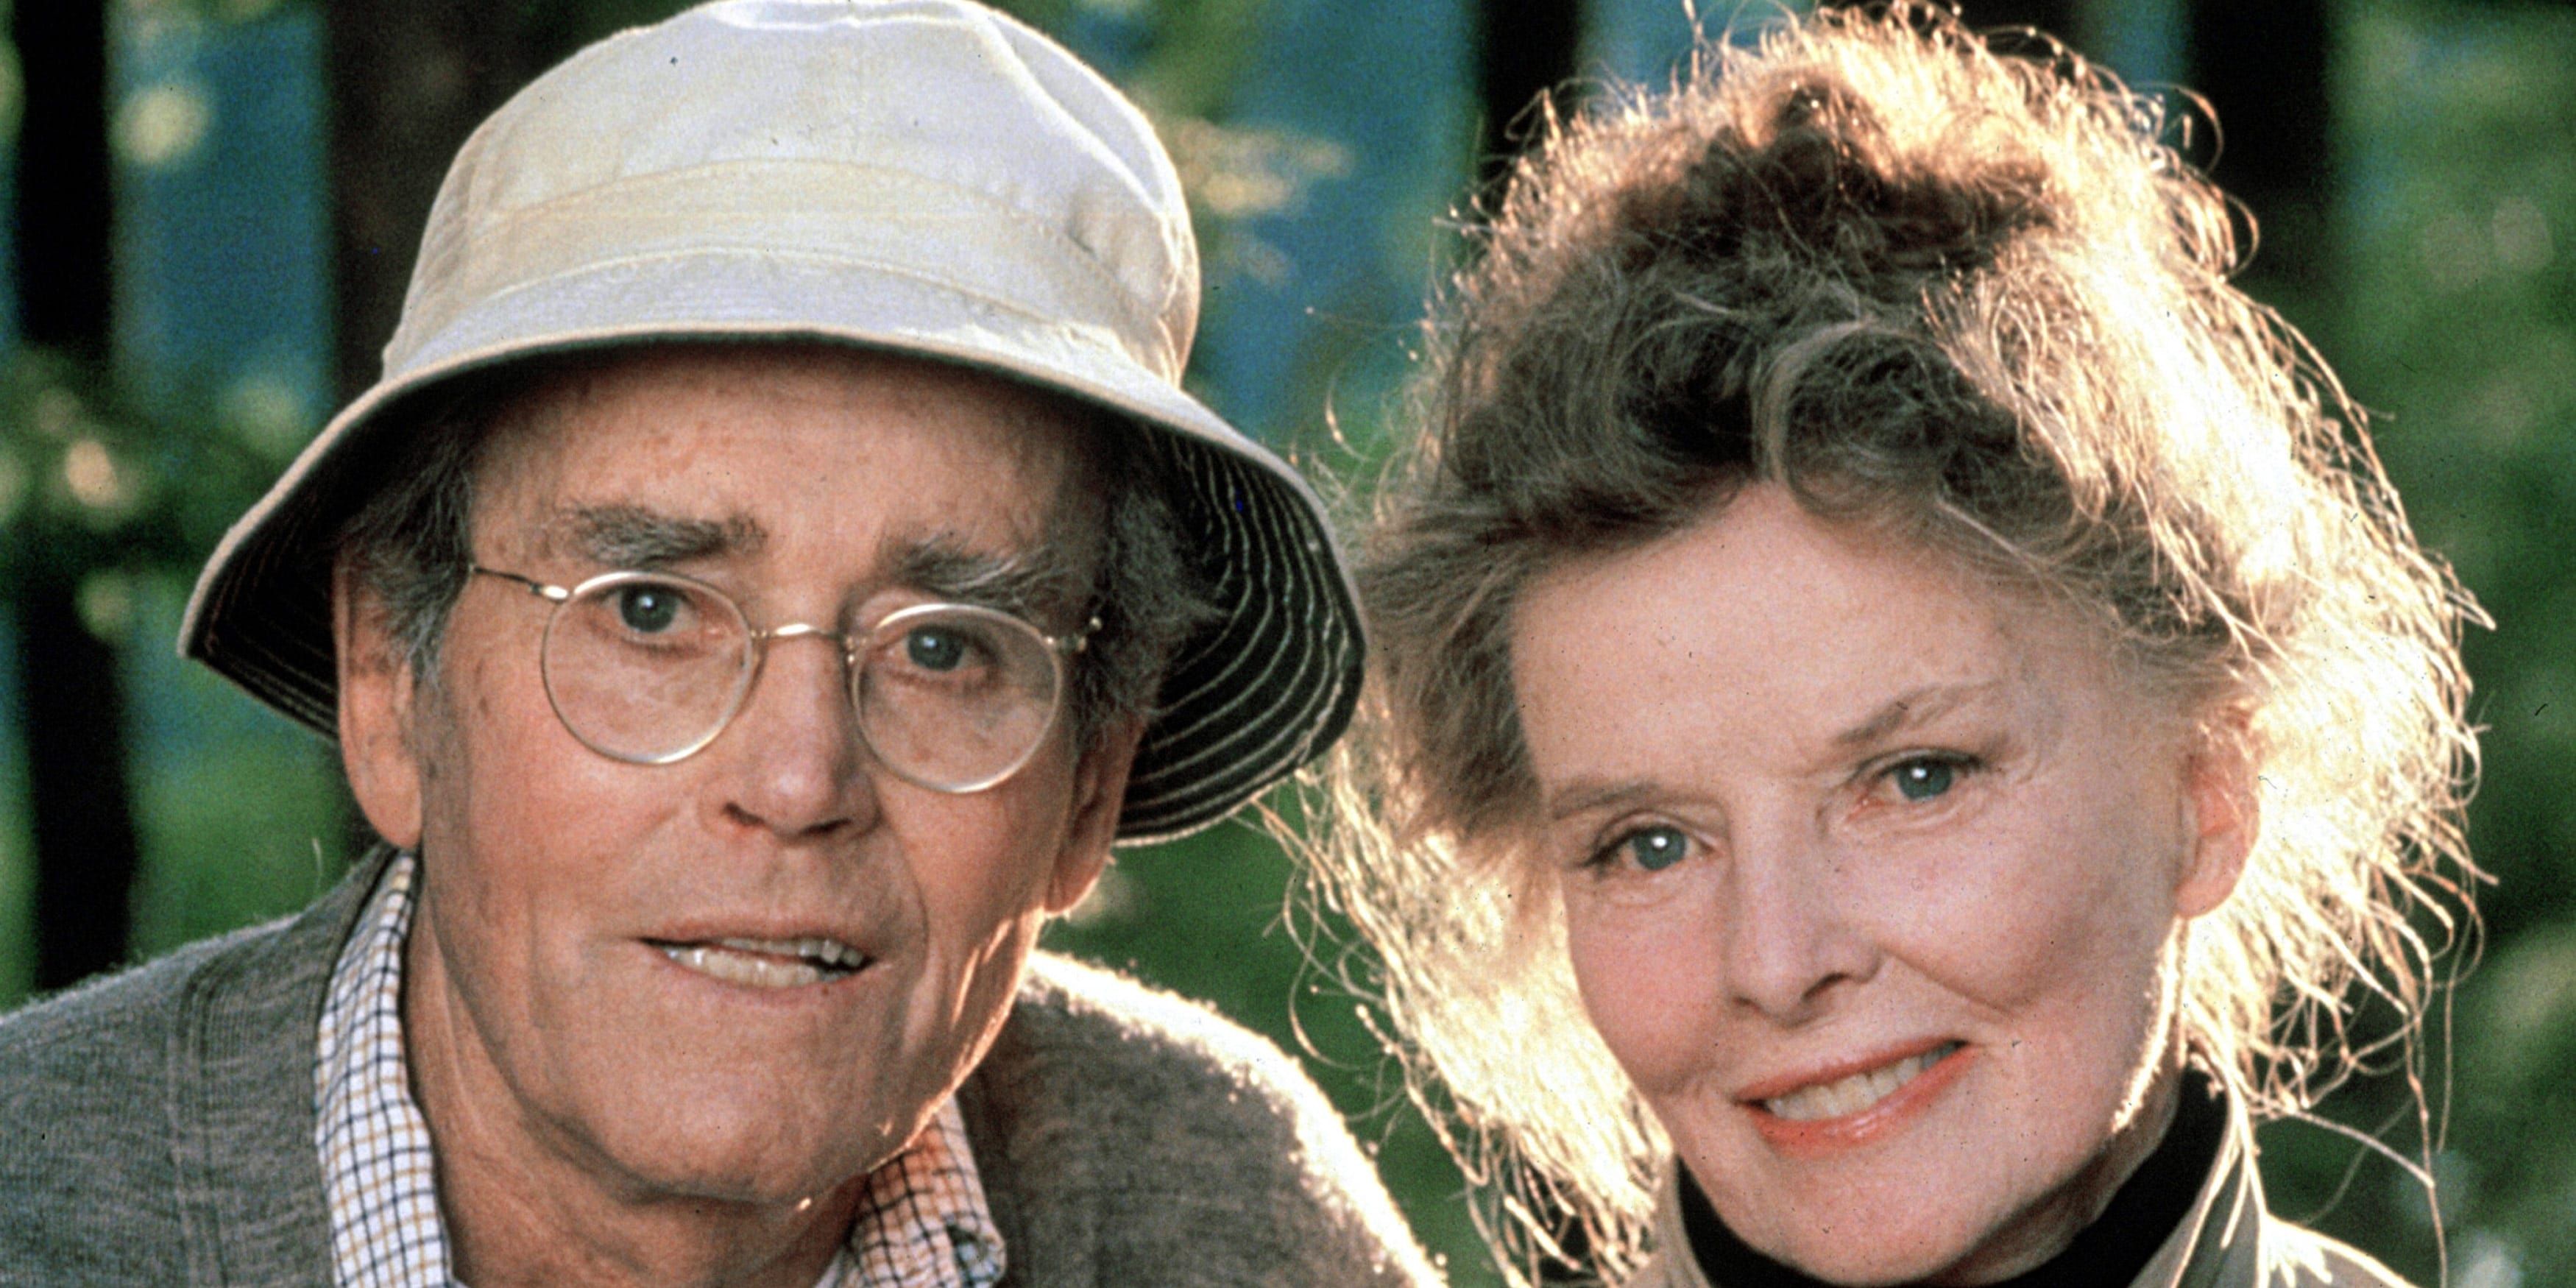 Norman and Ethel smiling for the camera in the film On Golden Pond